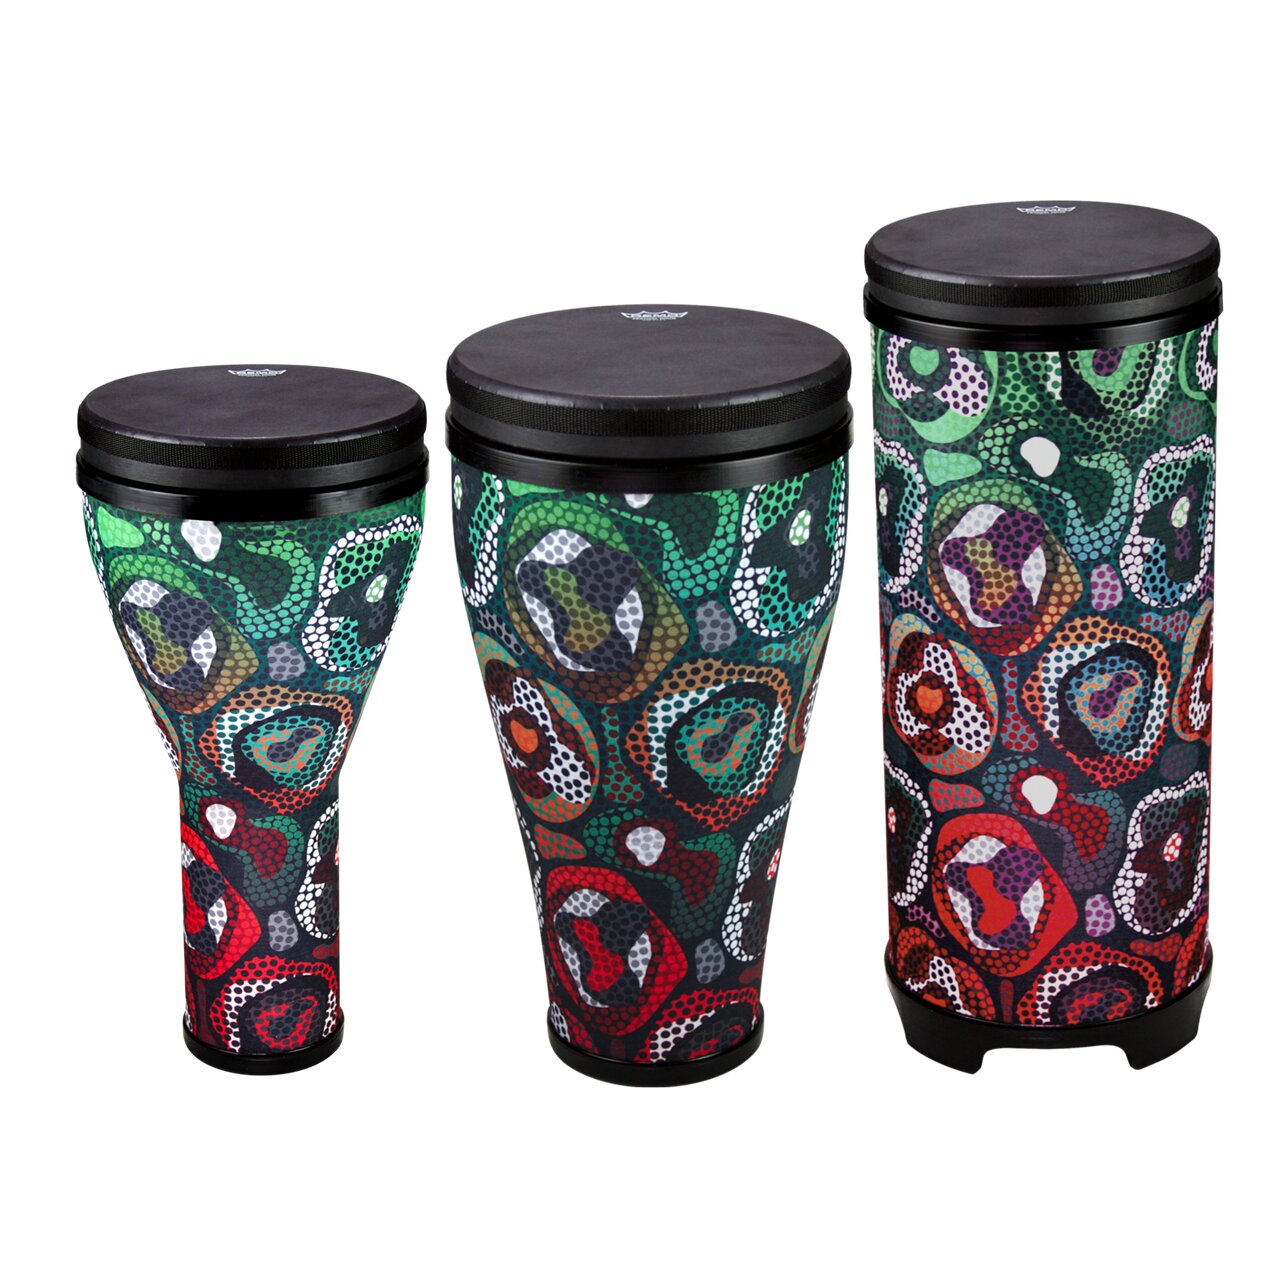 Remo Drum Combo Pack Tribal Green : photo 1